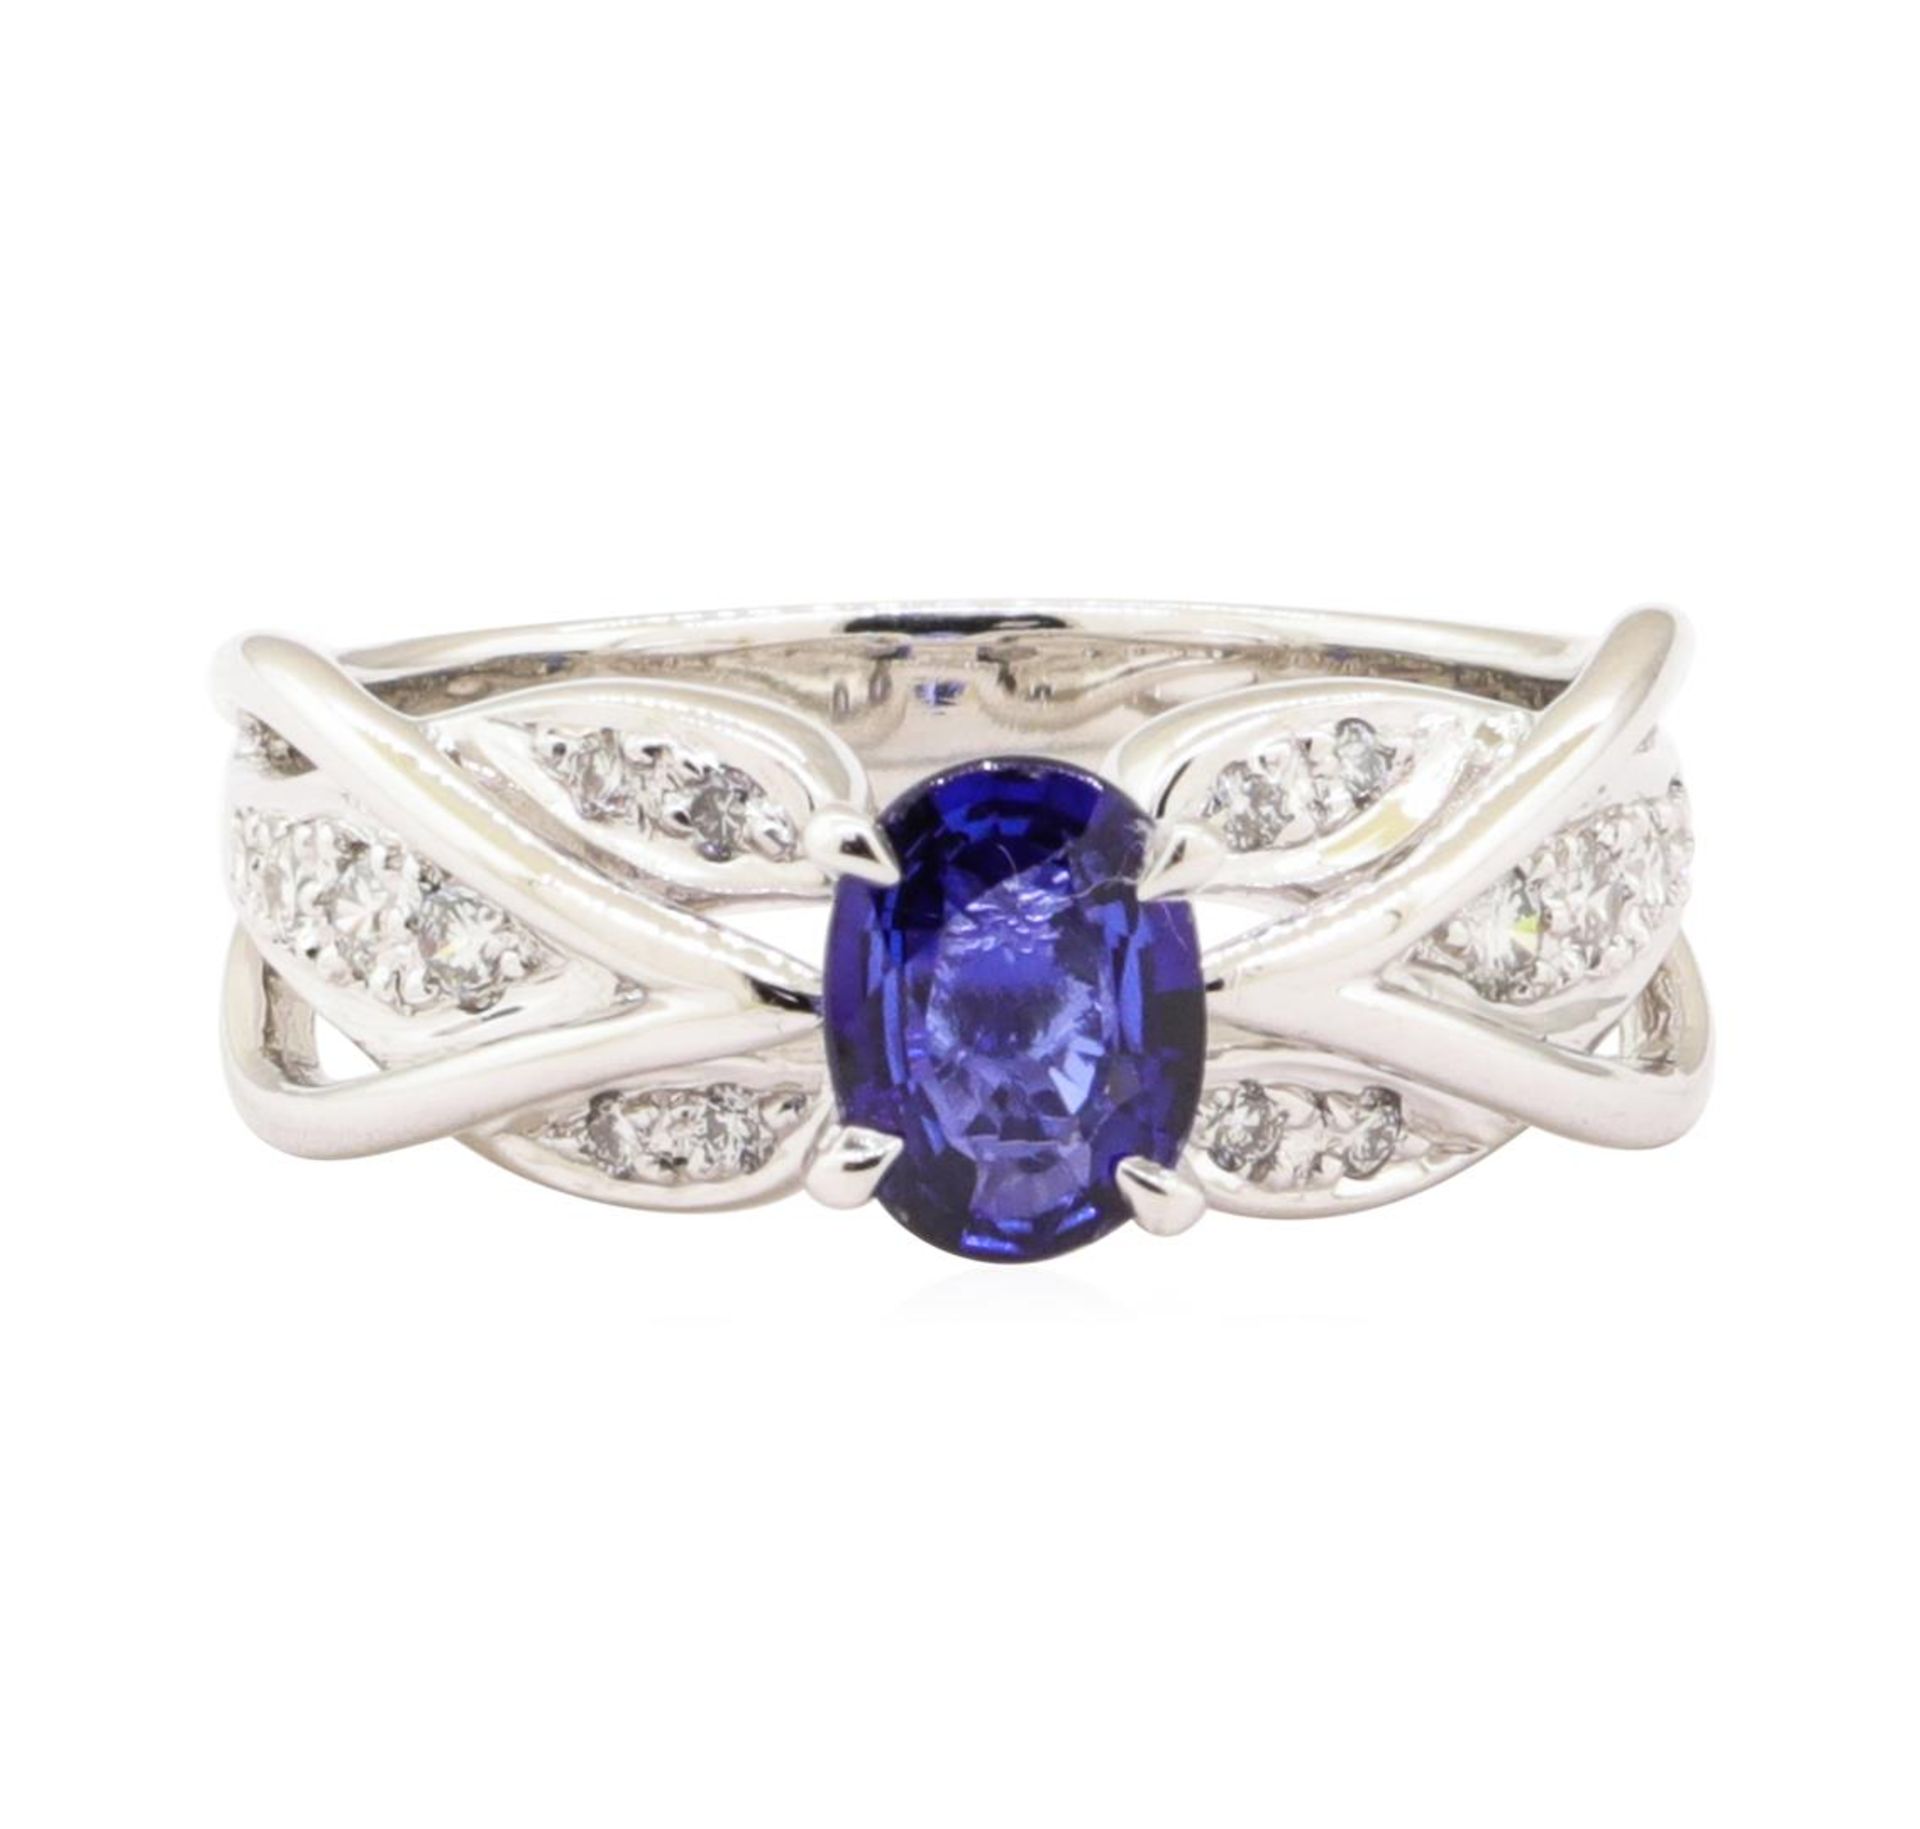 1.10 ctw Blue Sapphire And Diamond Ring - 18KT White Gold - Image 2 of 5